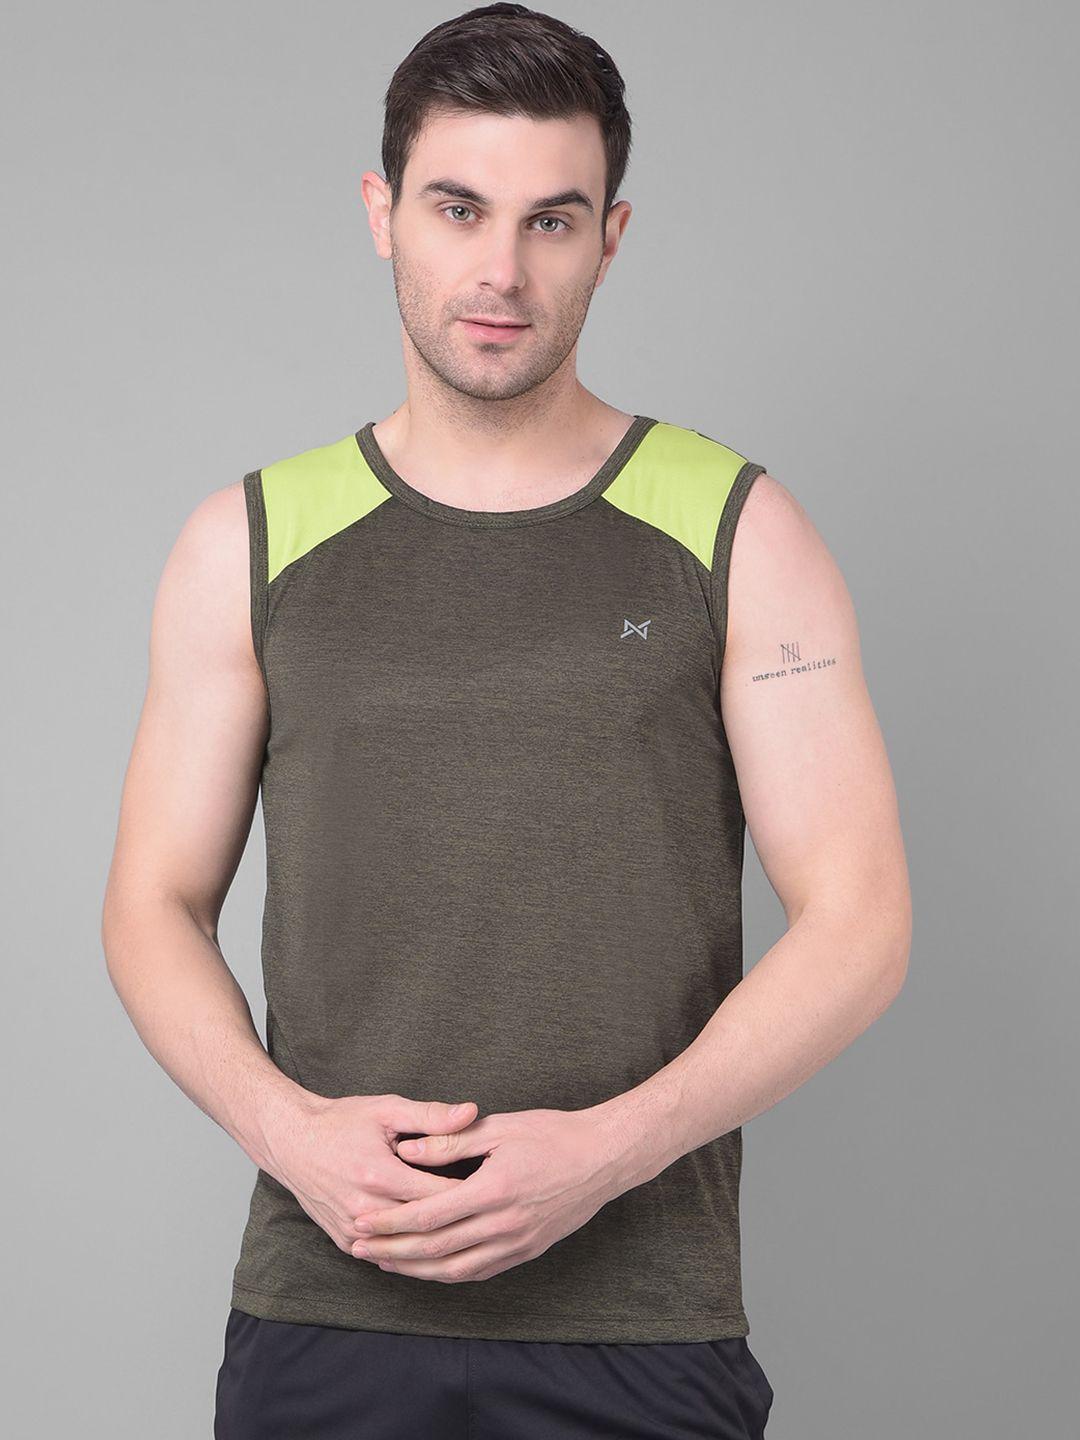 force-nxt-colourblocked-anti-viral-sports-gym-vest